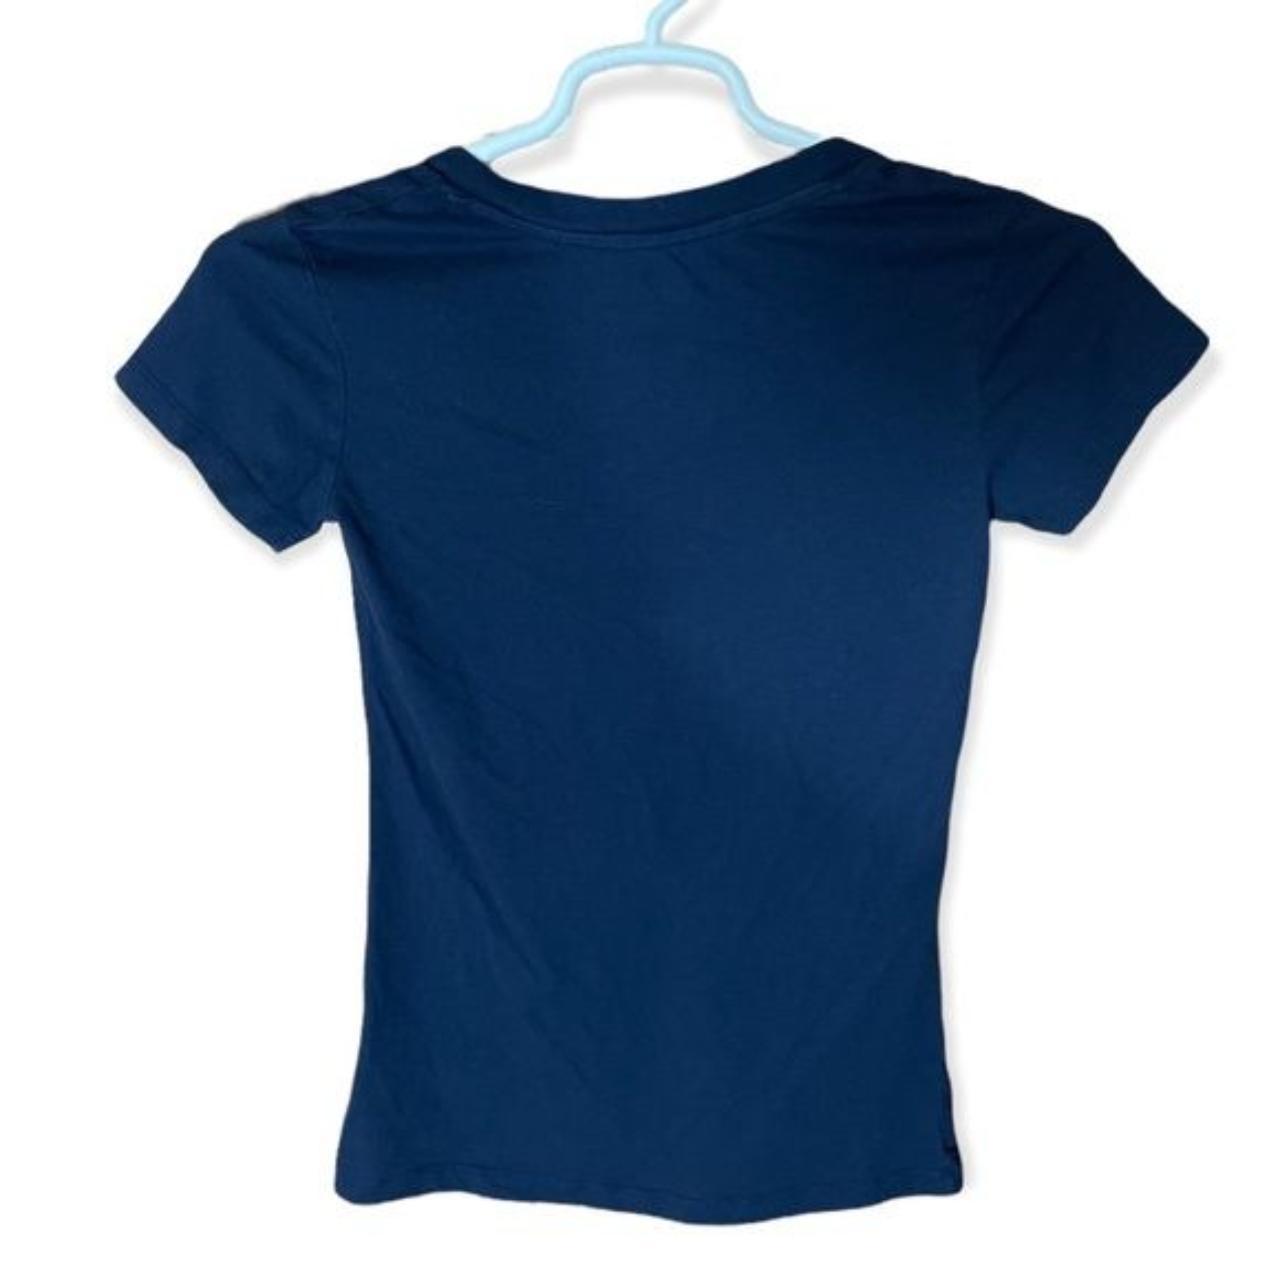 Apple Women's Blue and Yellow T-shirt (2)